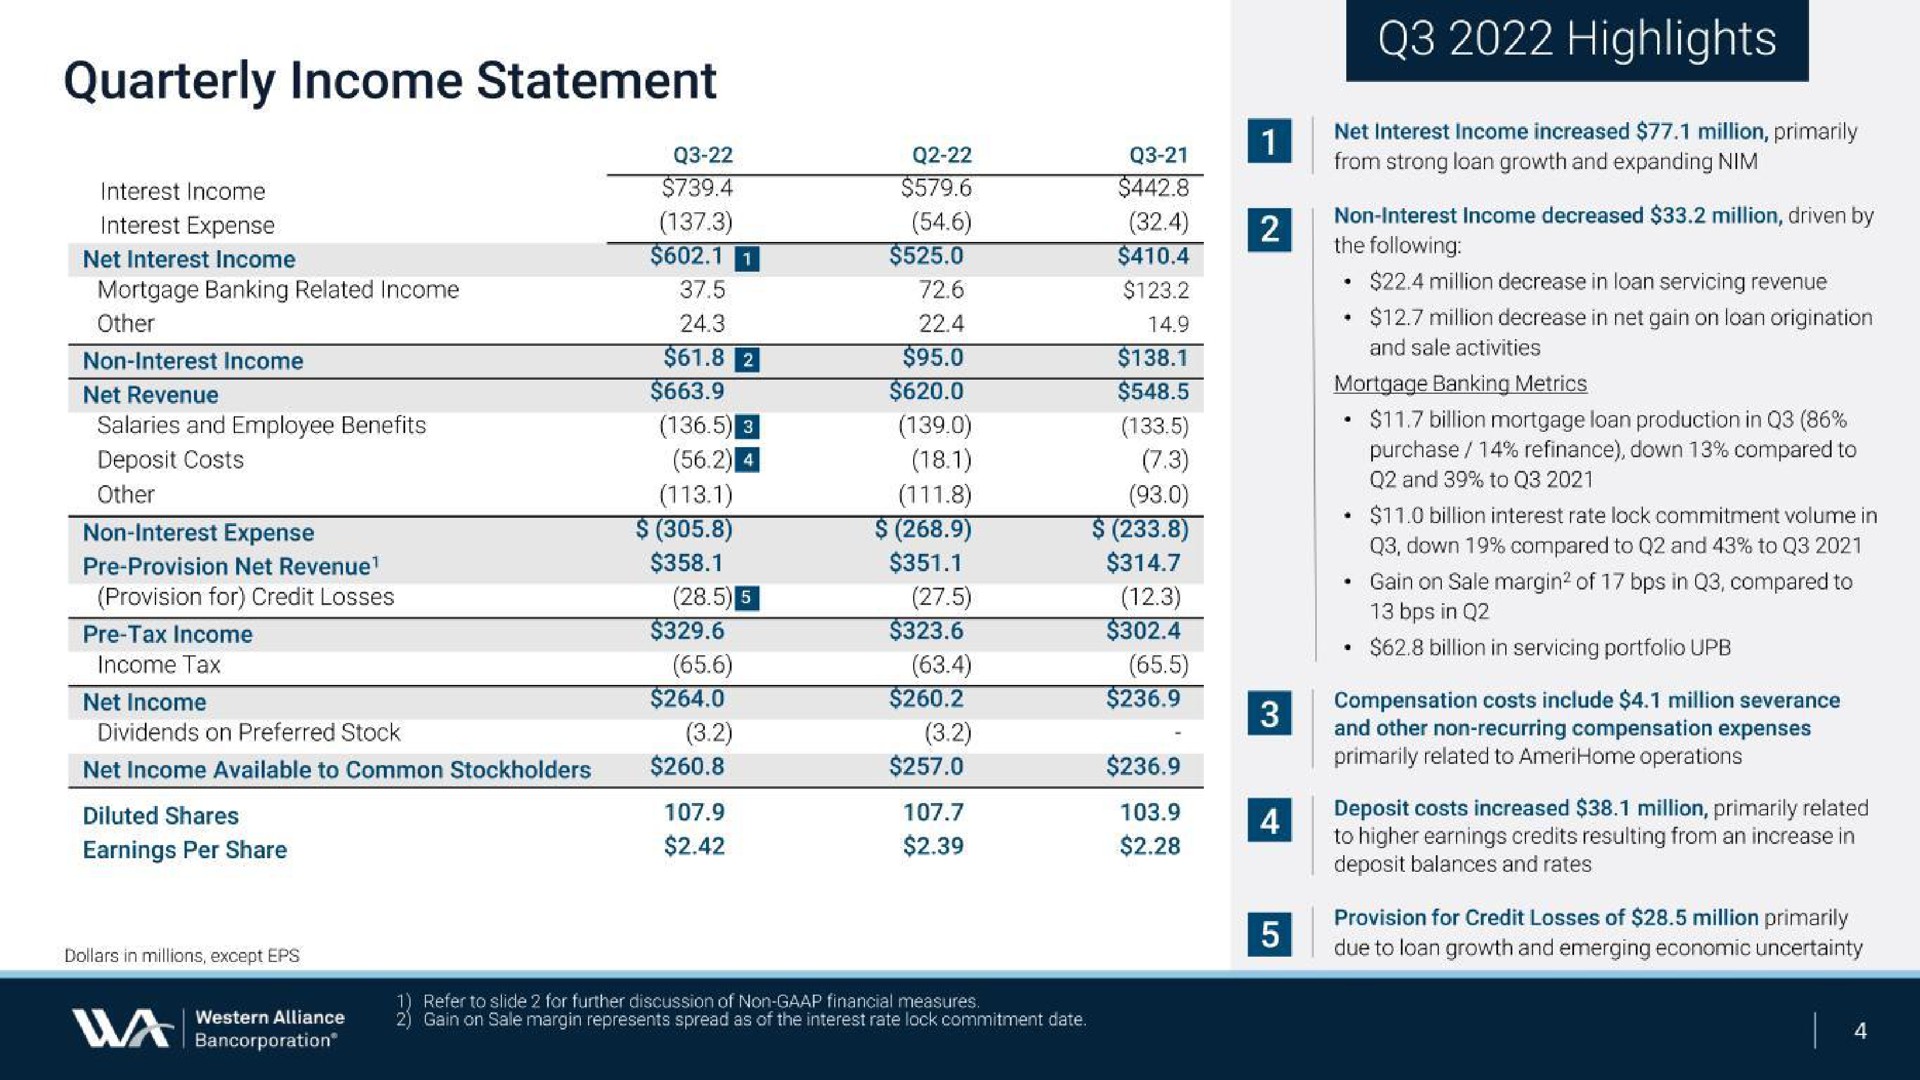 quarterly income statement non interest expense by highlights | Western Alliance Bancorporation